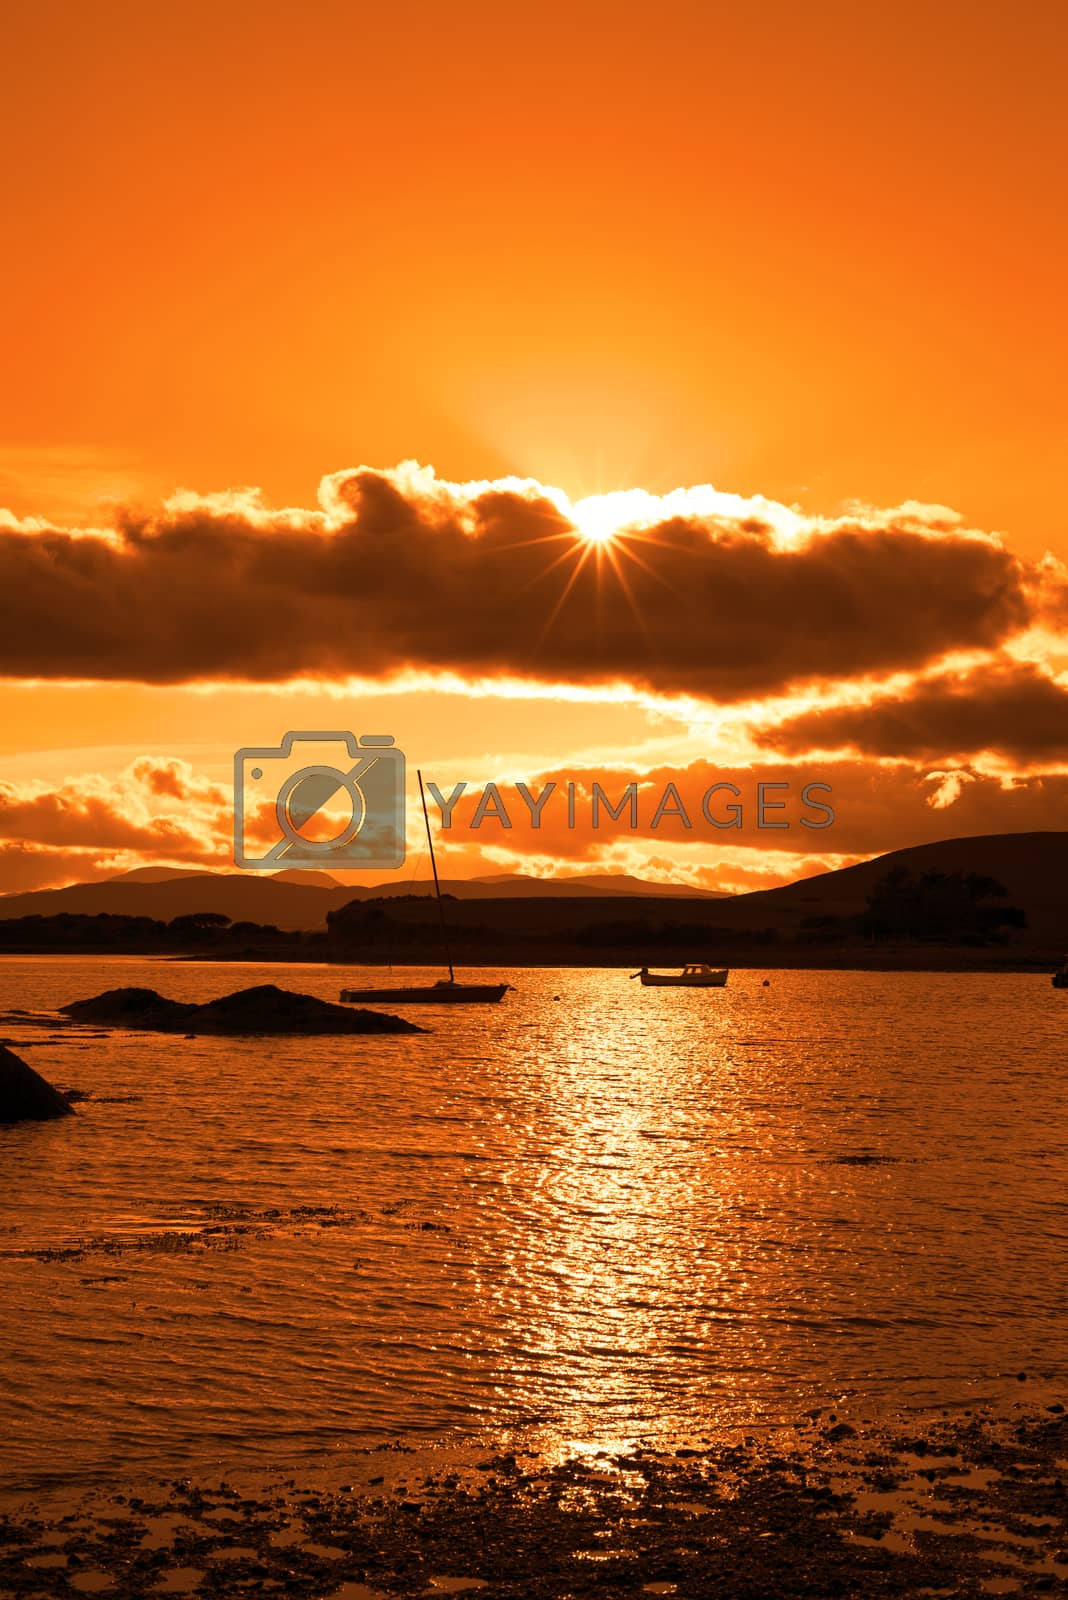 Royalty free image of boats in a quiet bay at sunset by morrbyte